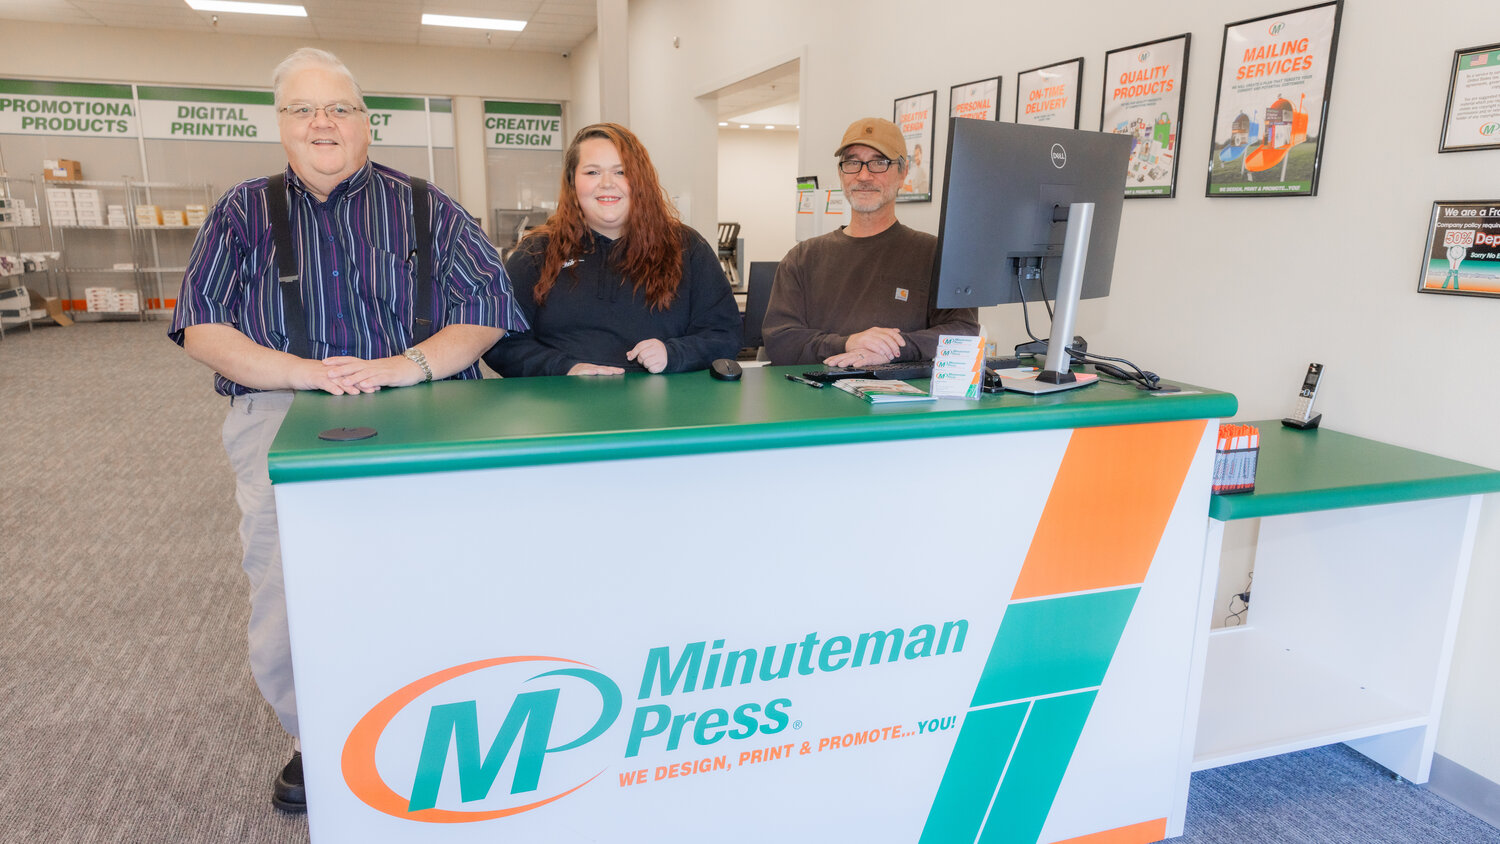 From left, Daryl Lund, Shakara Ryan and Robin Ronnell pose for a photo at Minuteman Press in Chehalis on Tuesday, Nov. 14.